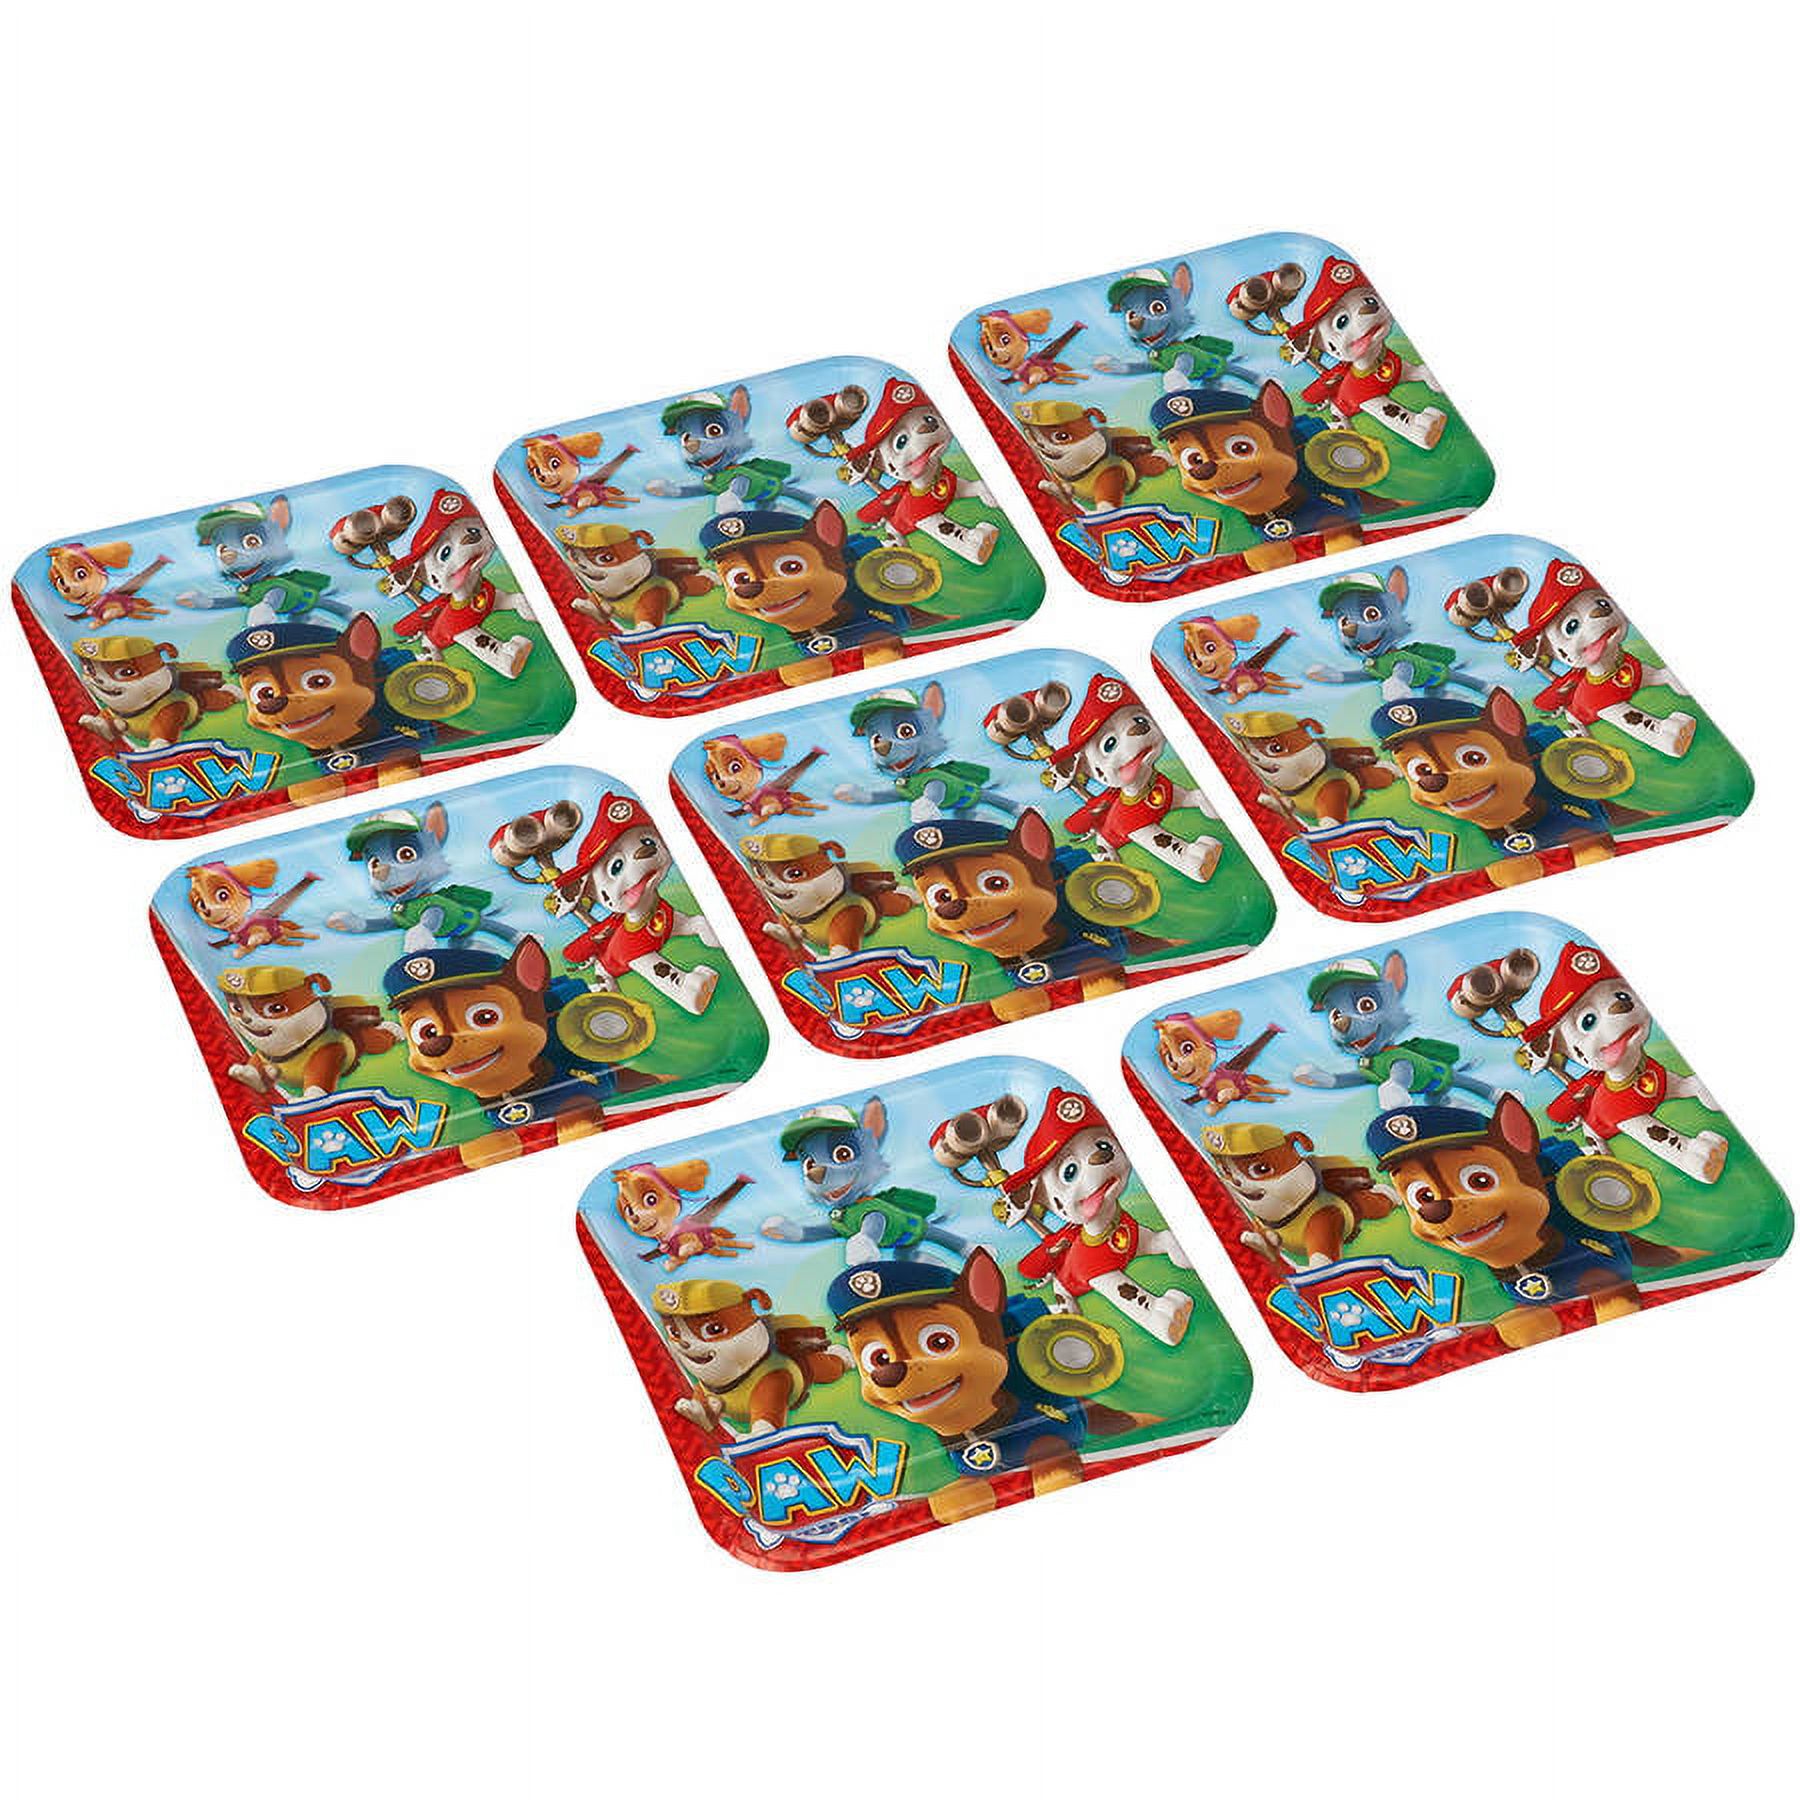 9" PAW Patrol Square Paper Party Plate, 8ct - image 2 of 3